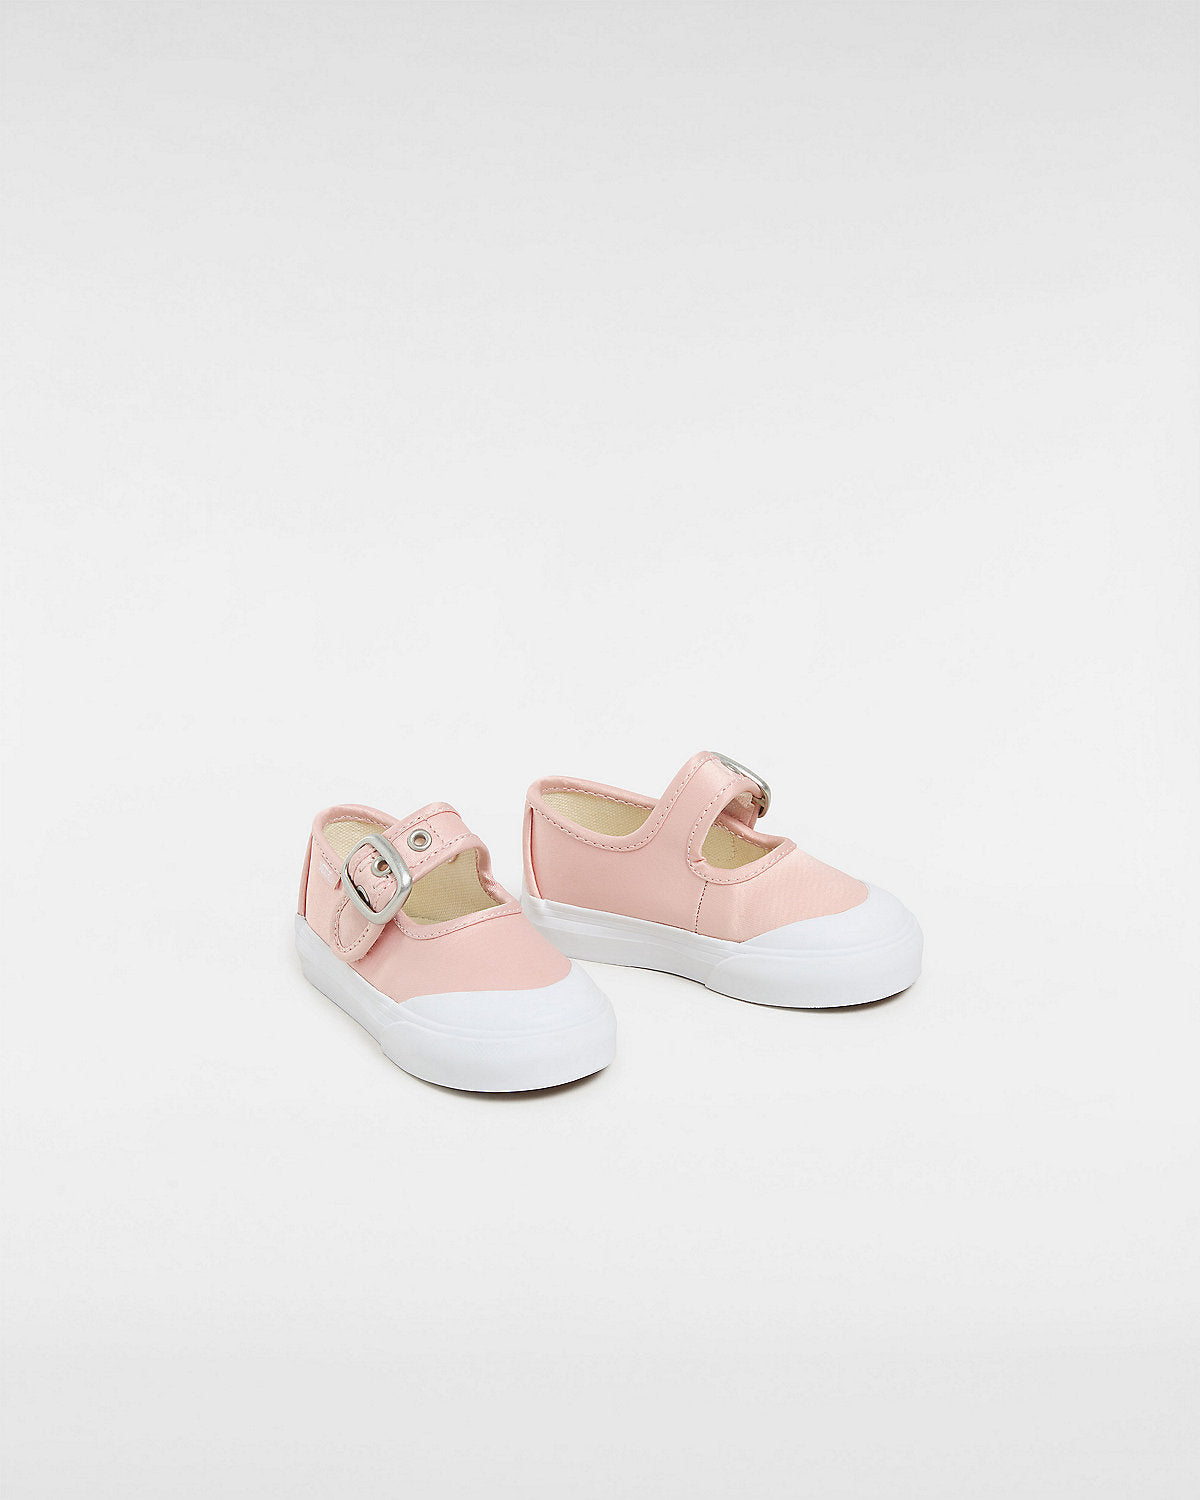 VANS Toddler Mary Jane Trainers - Pink